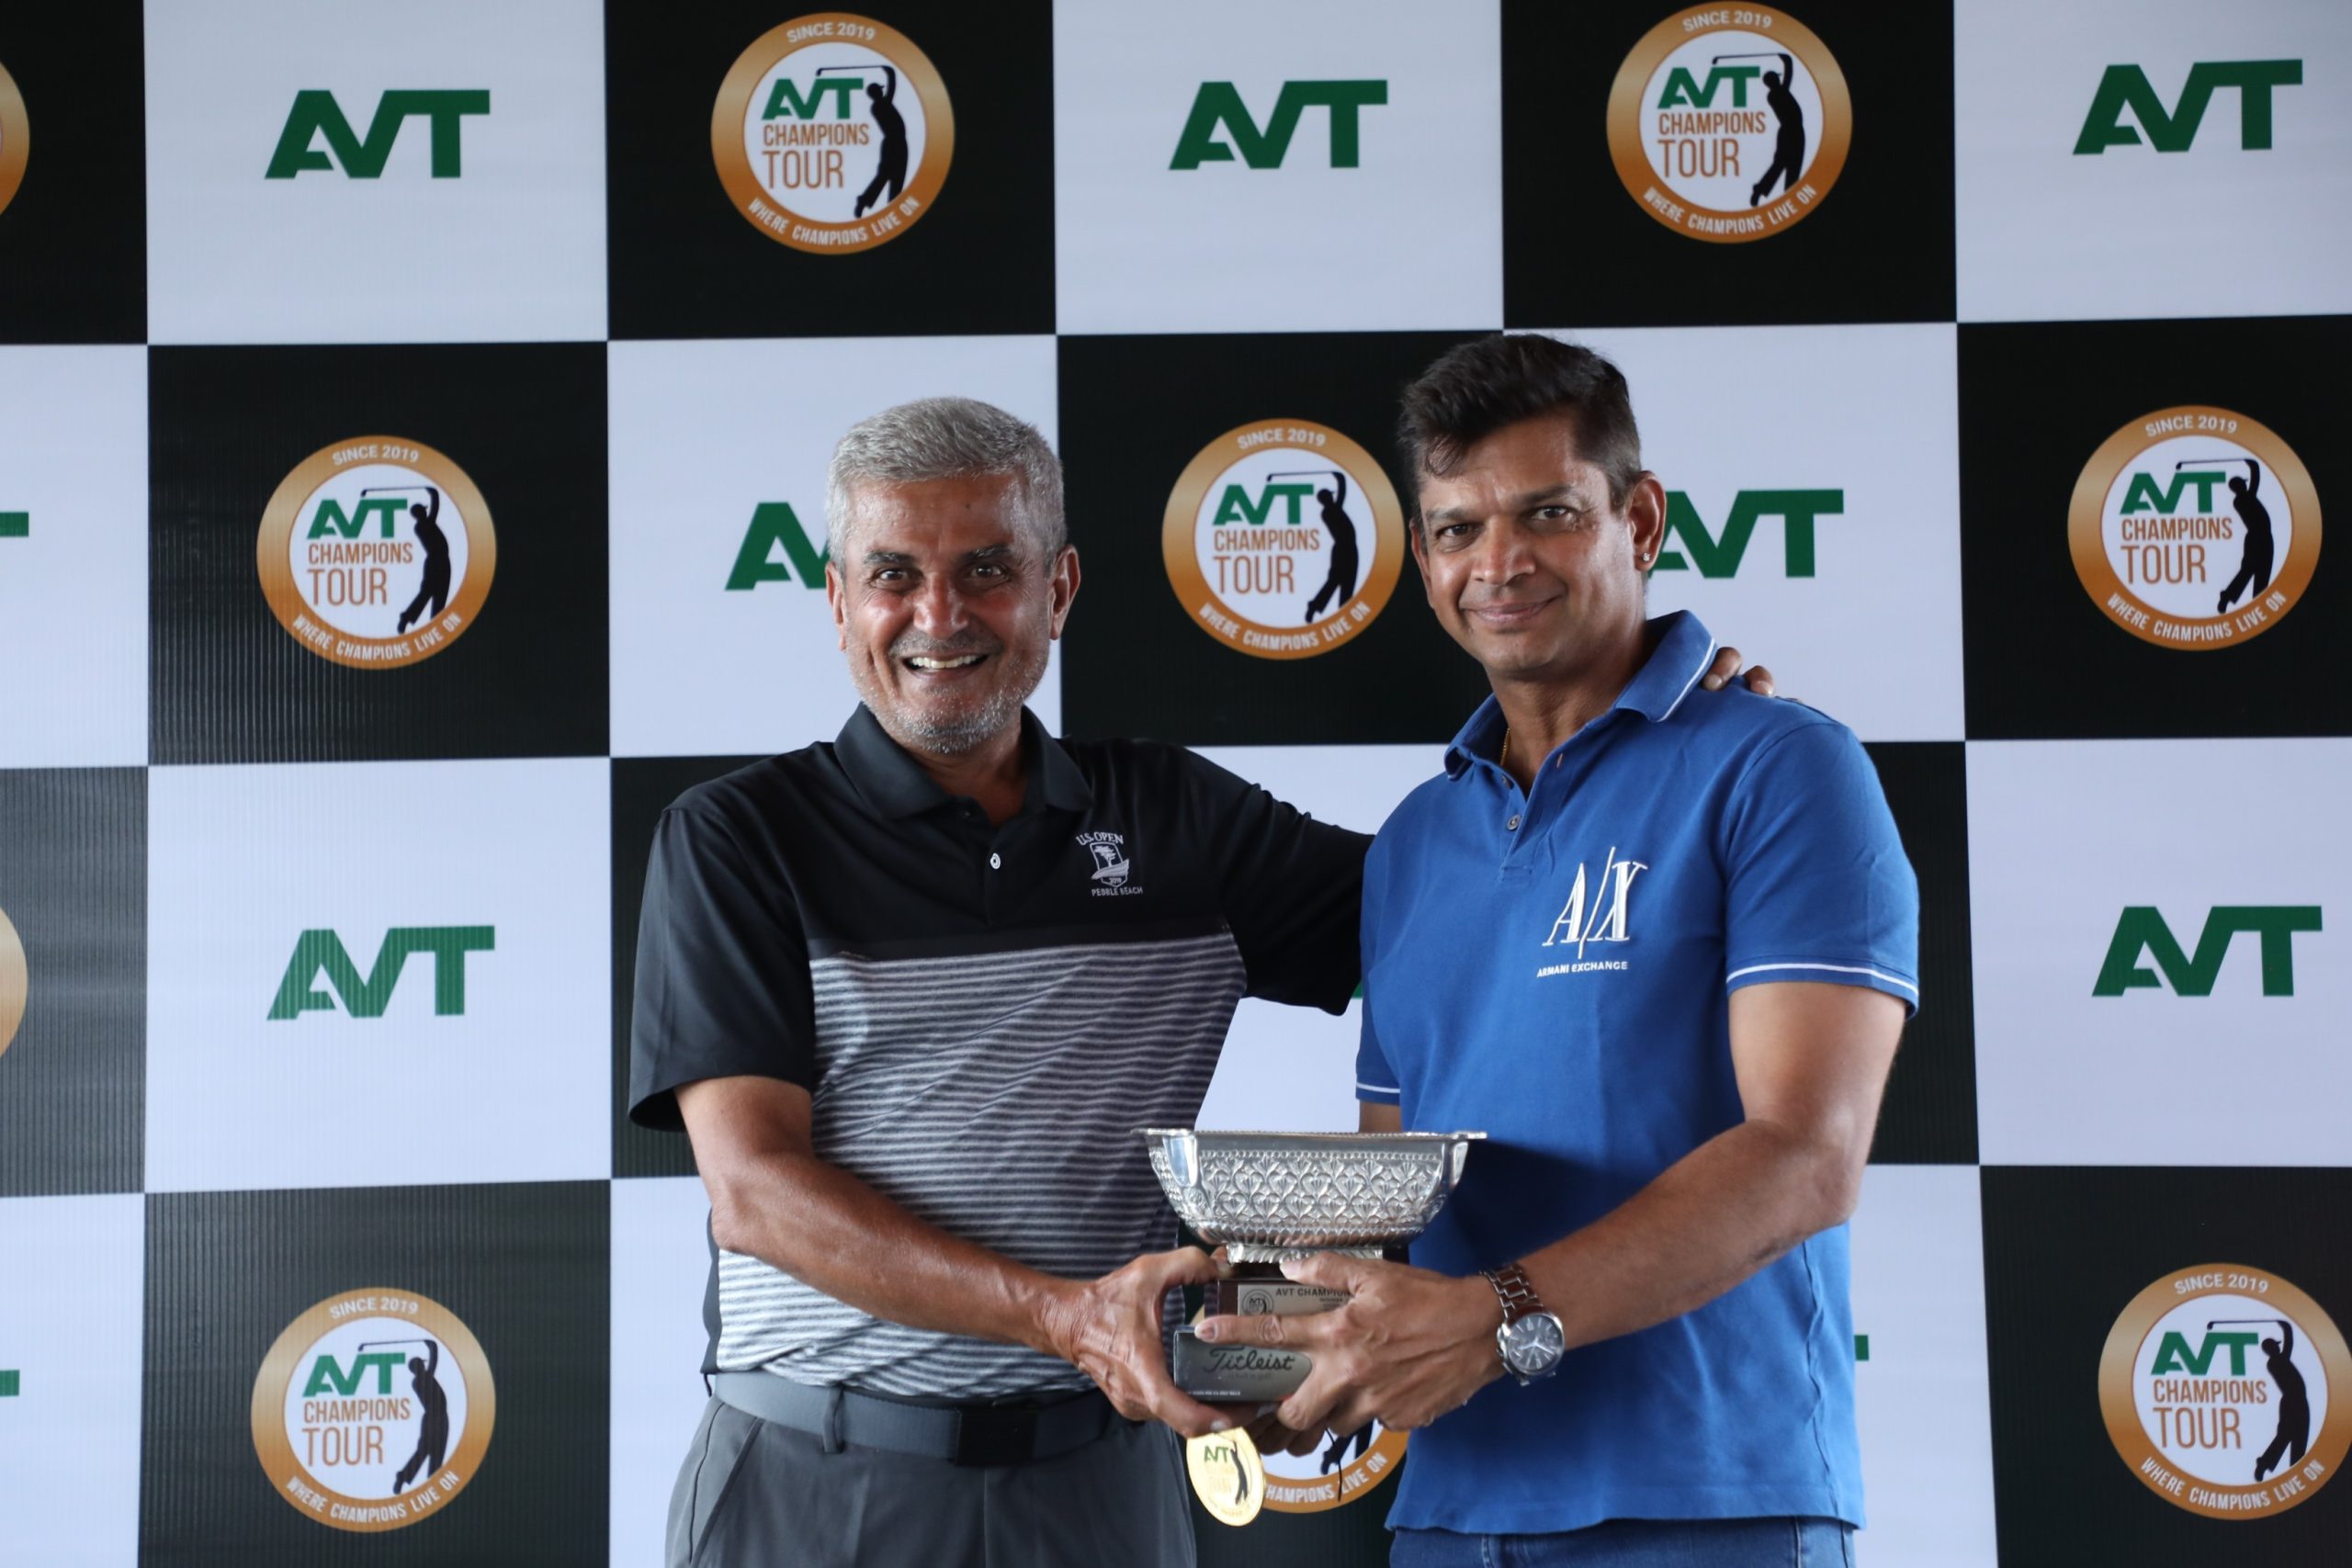 AVT Champions Tour - Sandhu wins 4 in a row !